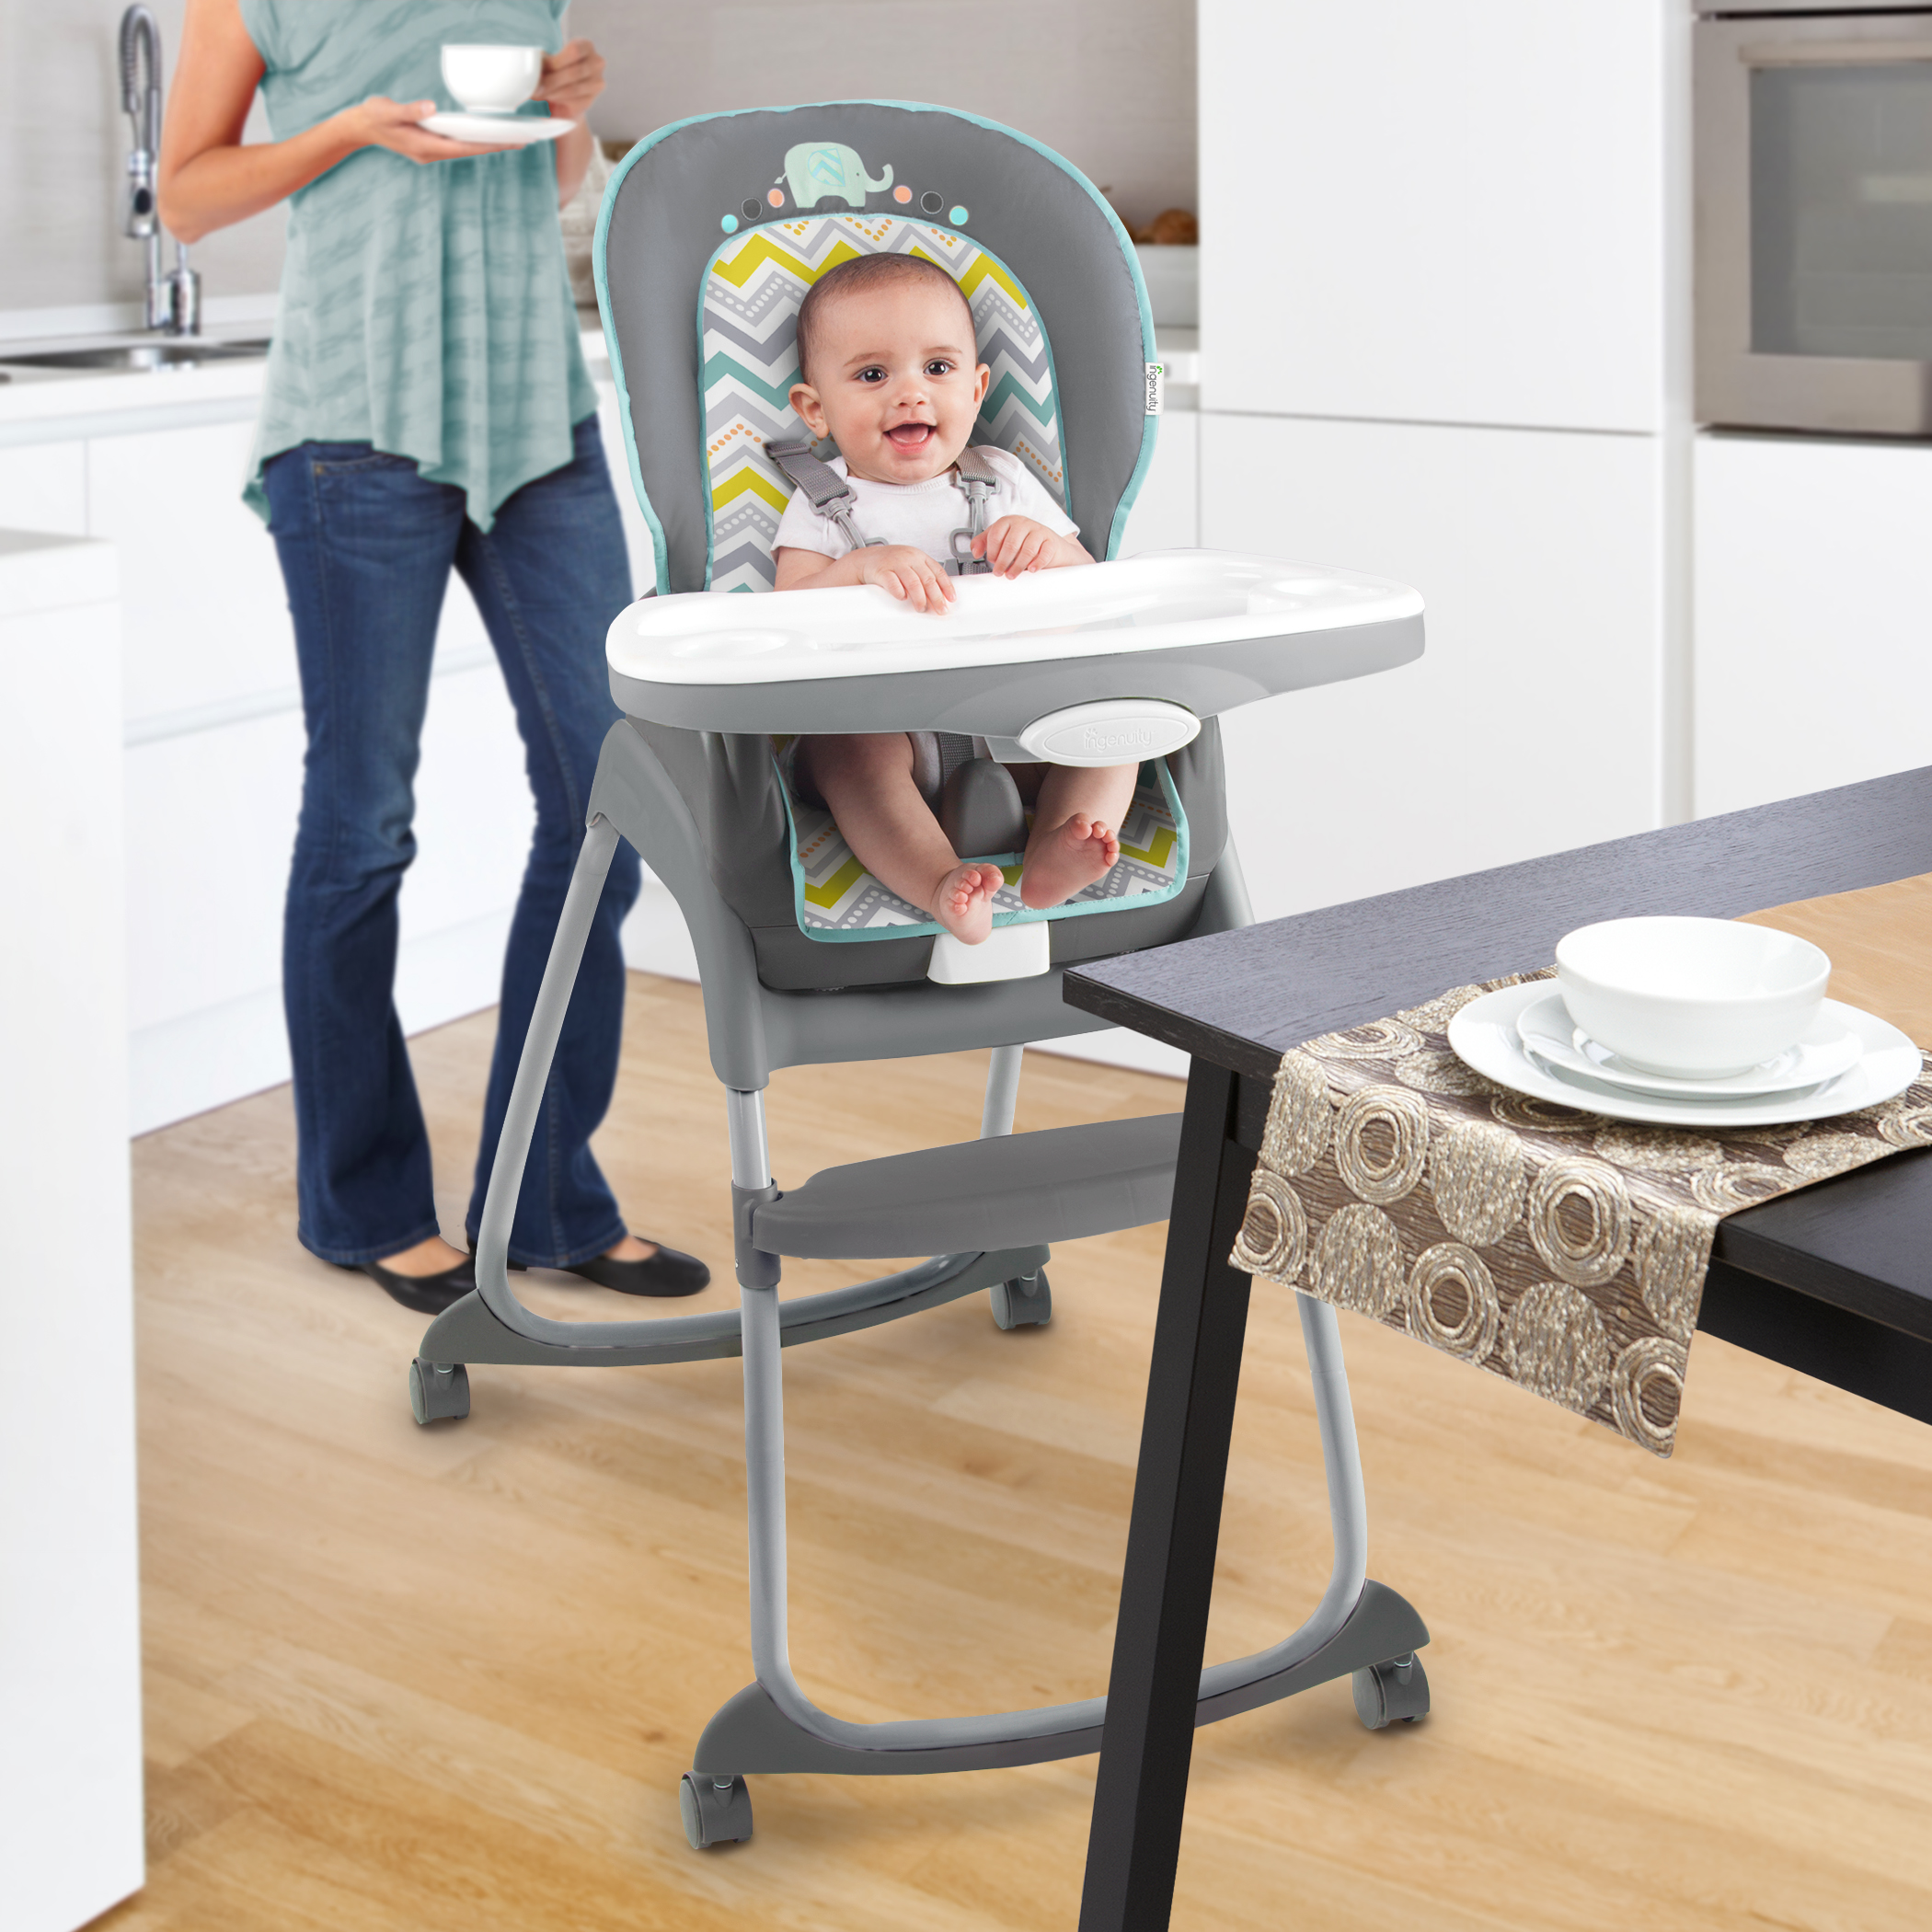 Ingenuity Trio 3-in-1 High Chair - Avondale - image 4 of 4